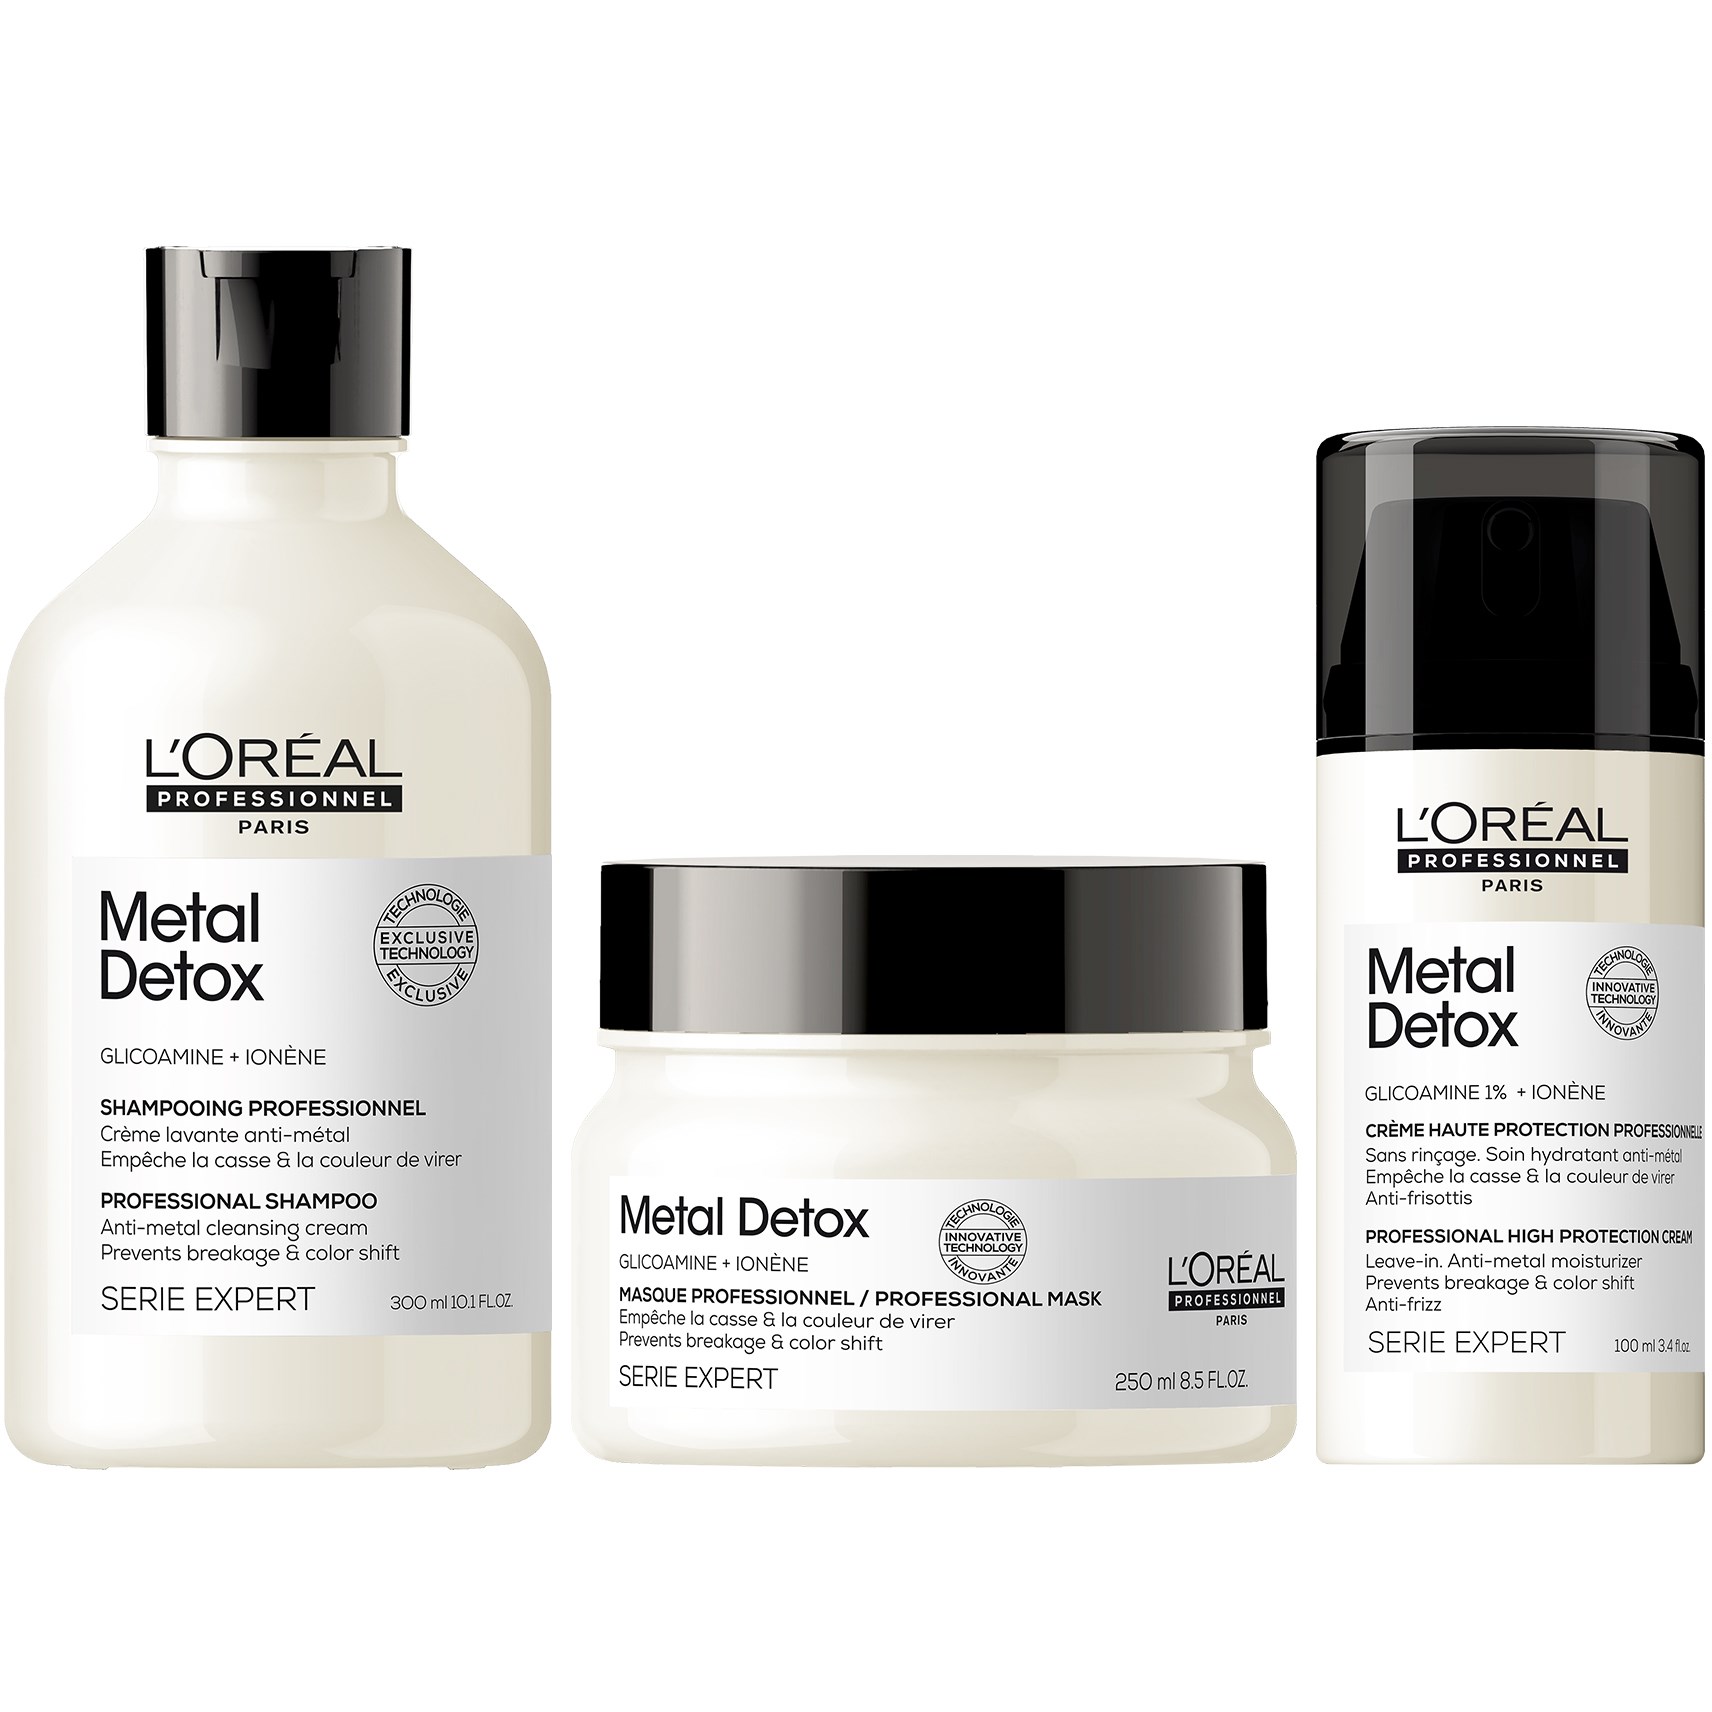 Bilde av L'oréal Professionnel Metal Dx Metal Dx Anti-breakage And Protect-colo